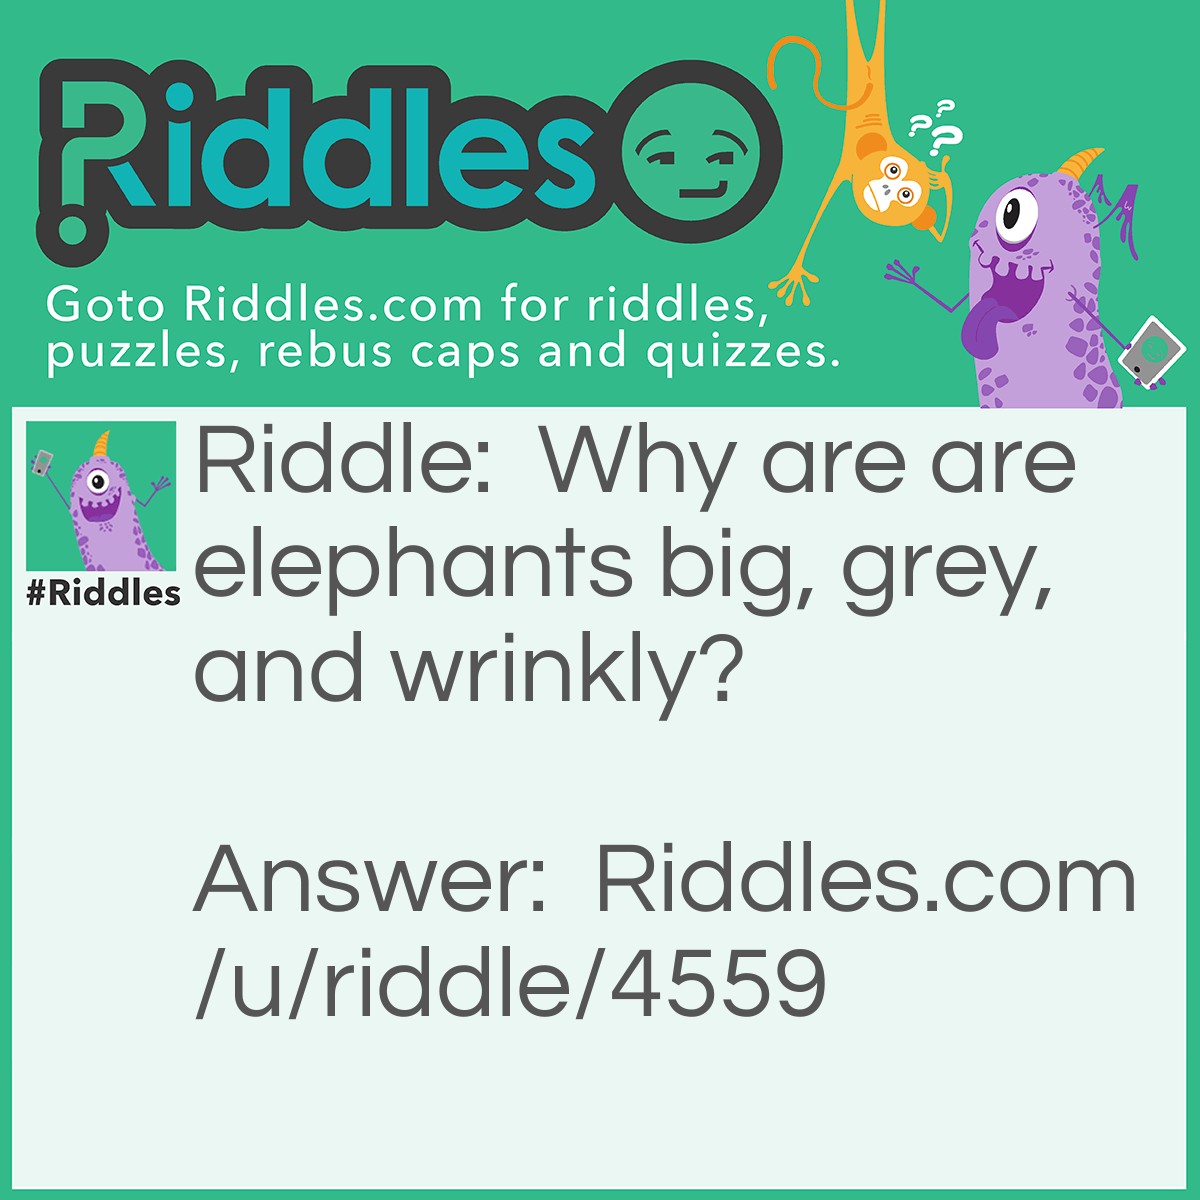 Riddle: Why are are elephants big, grey, and wrinkly? Answer: Because if they were small, white, and smooth, they would be aspirins.